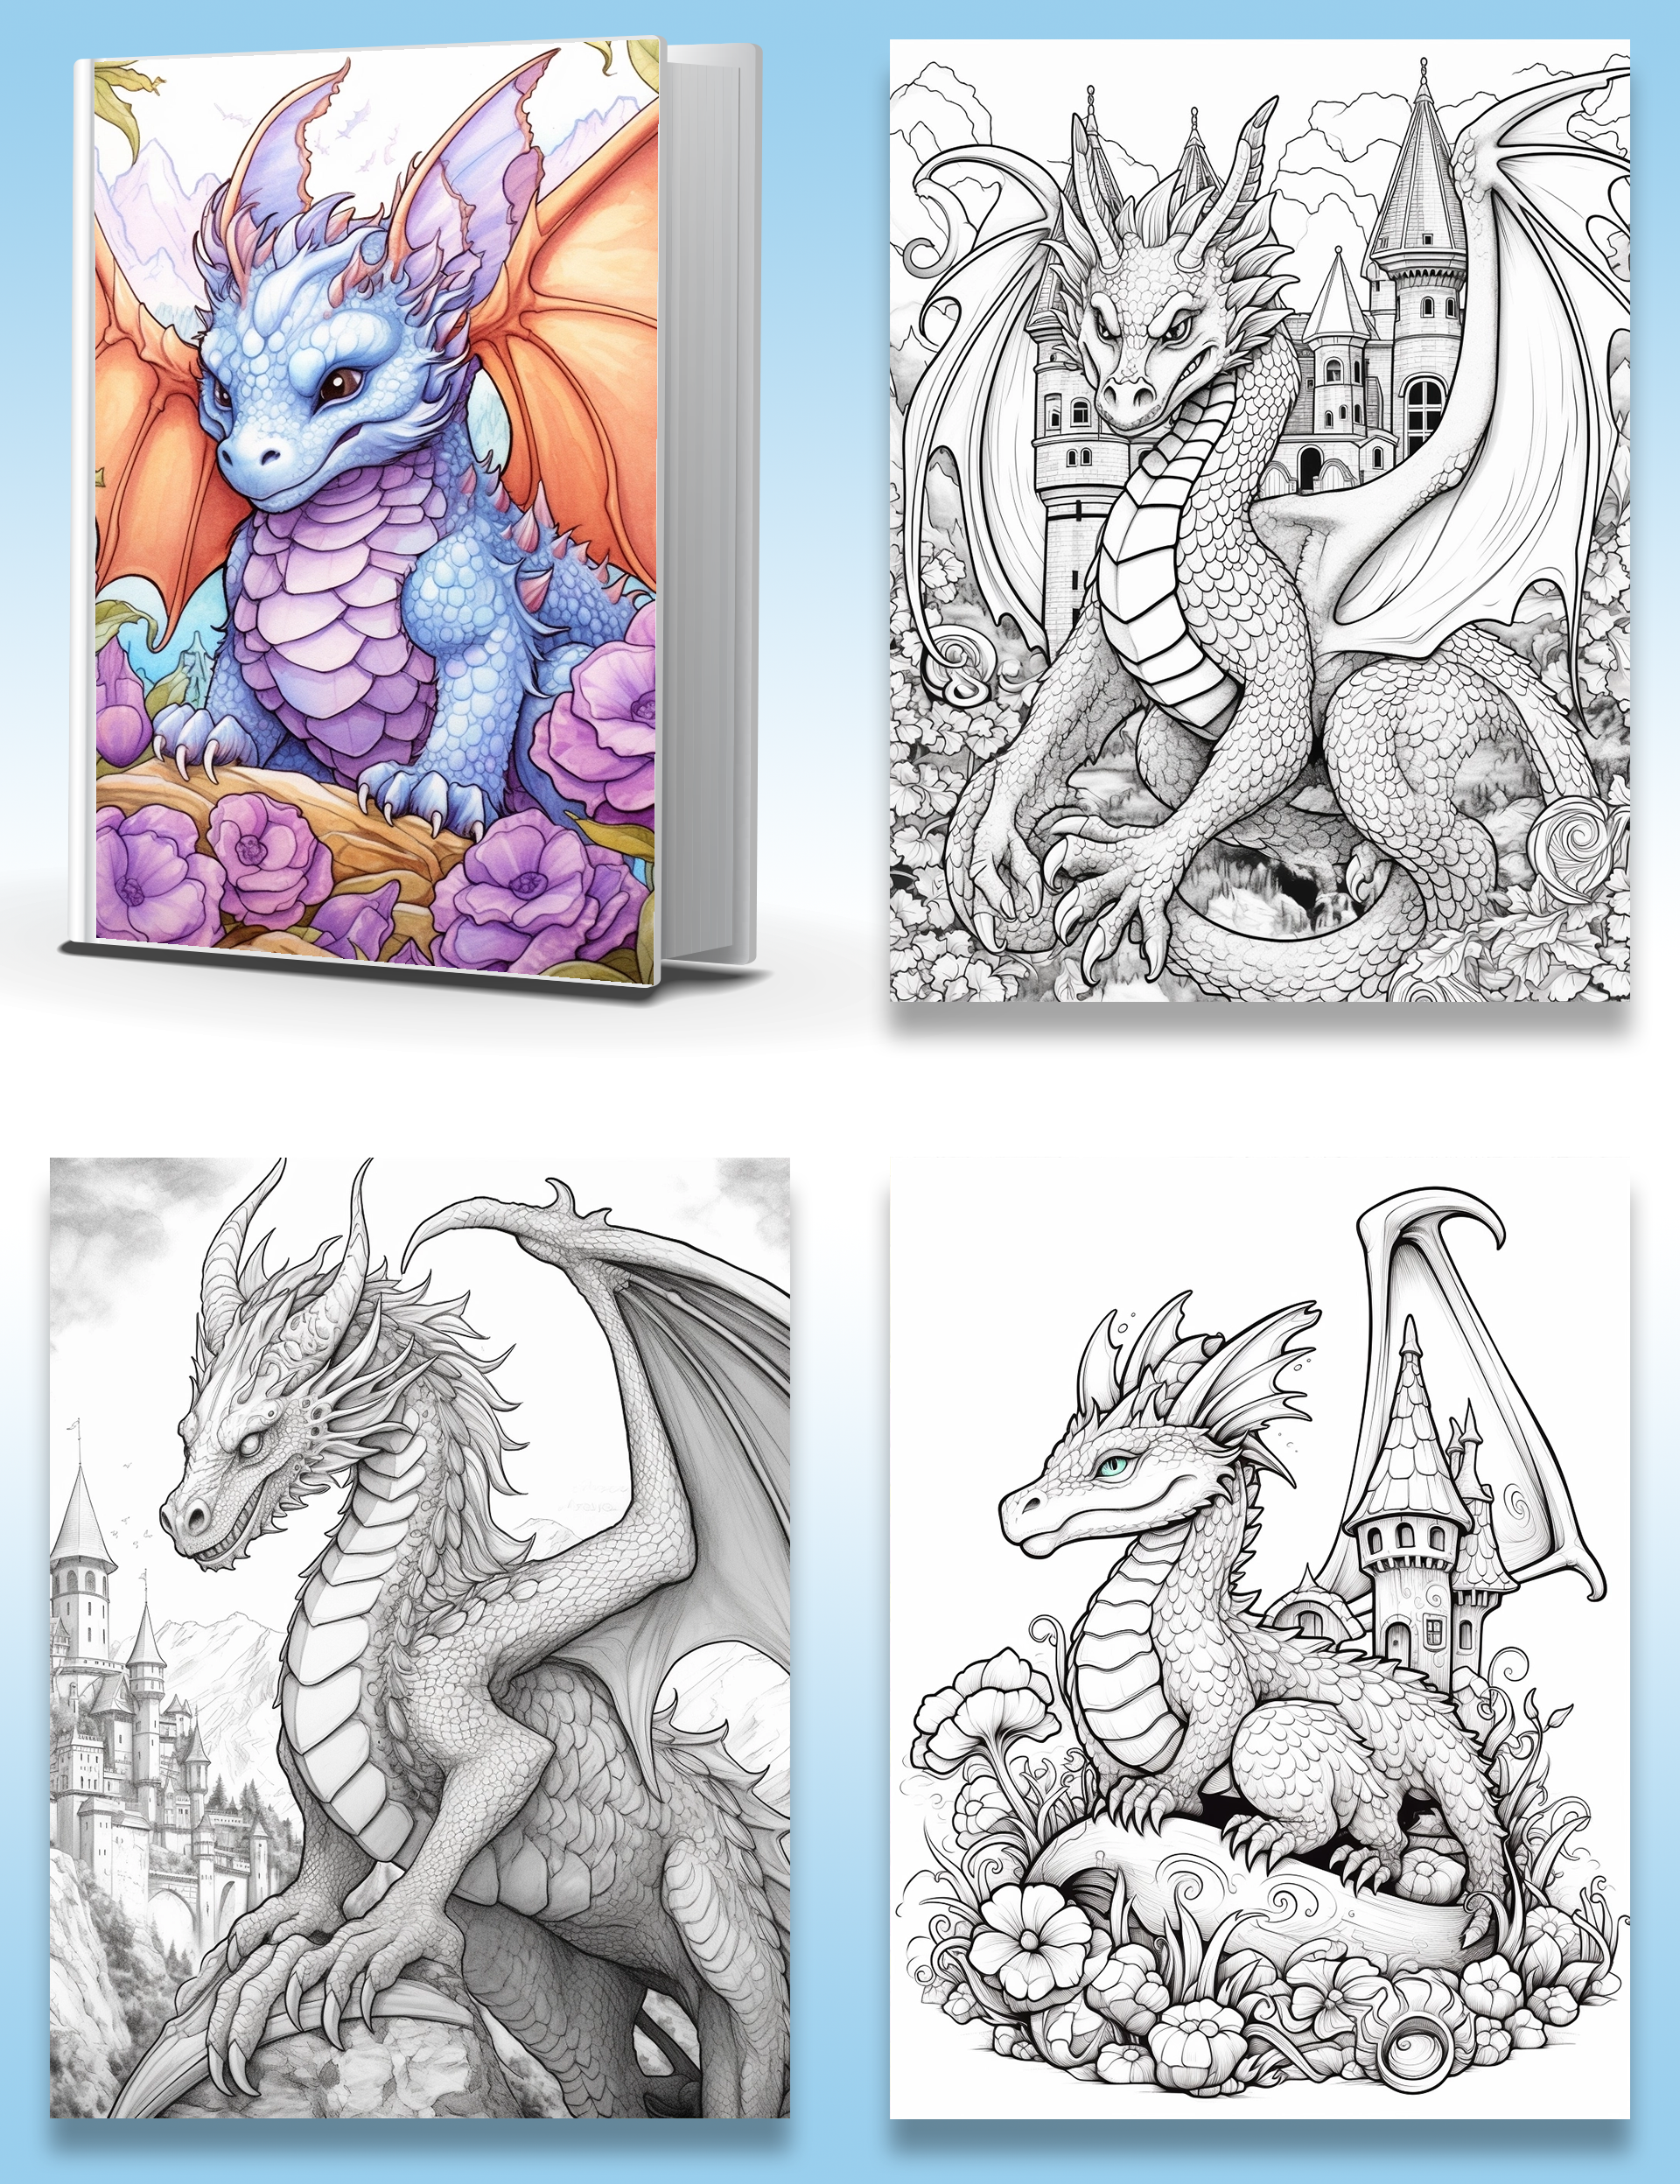 Unleash Your Imagination and Bring Majestic Dragons to Life with Vibrant Colors!